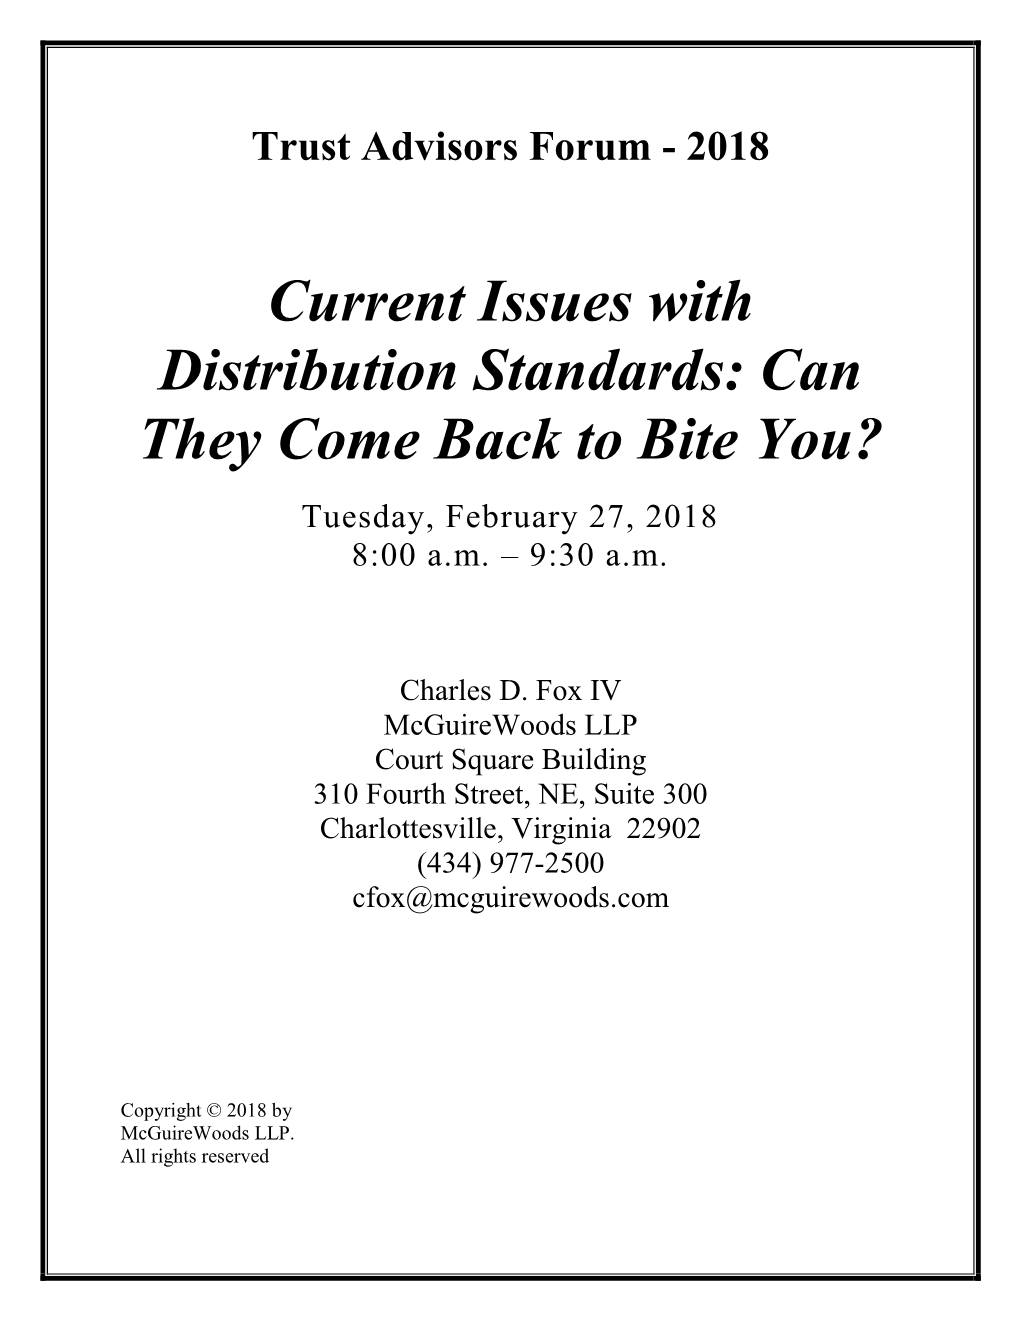 Current Issues with Distribution Standards: Can They Come Back to Bite You? Tuesday, February 27, 2018 8:00 A.M